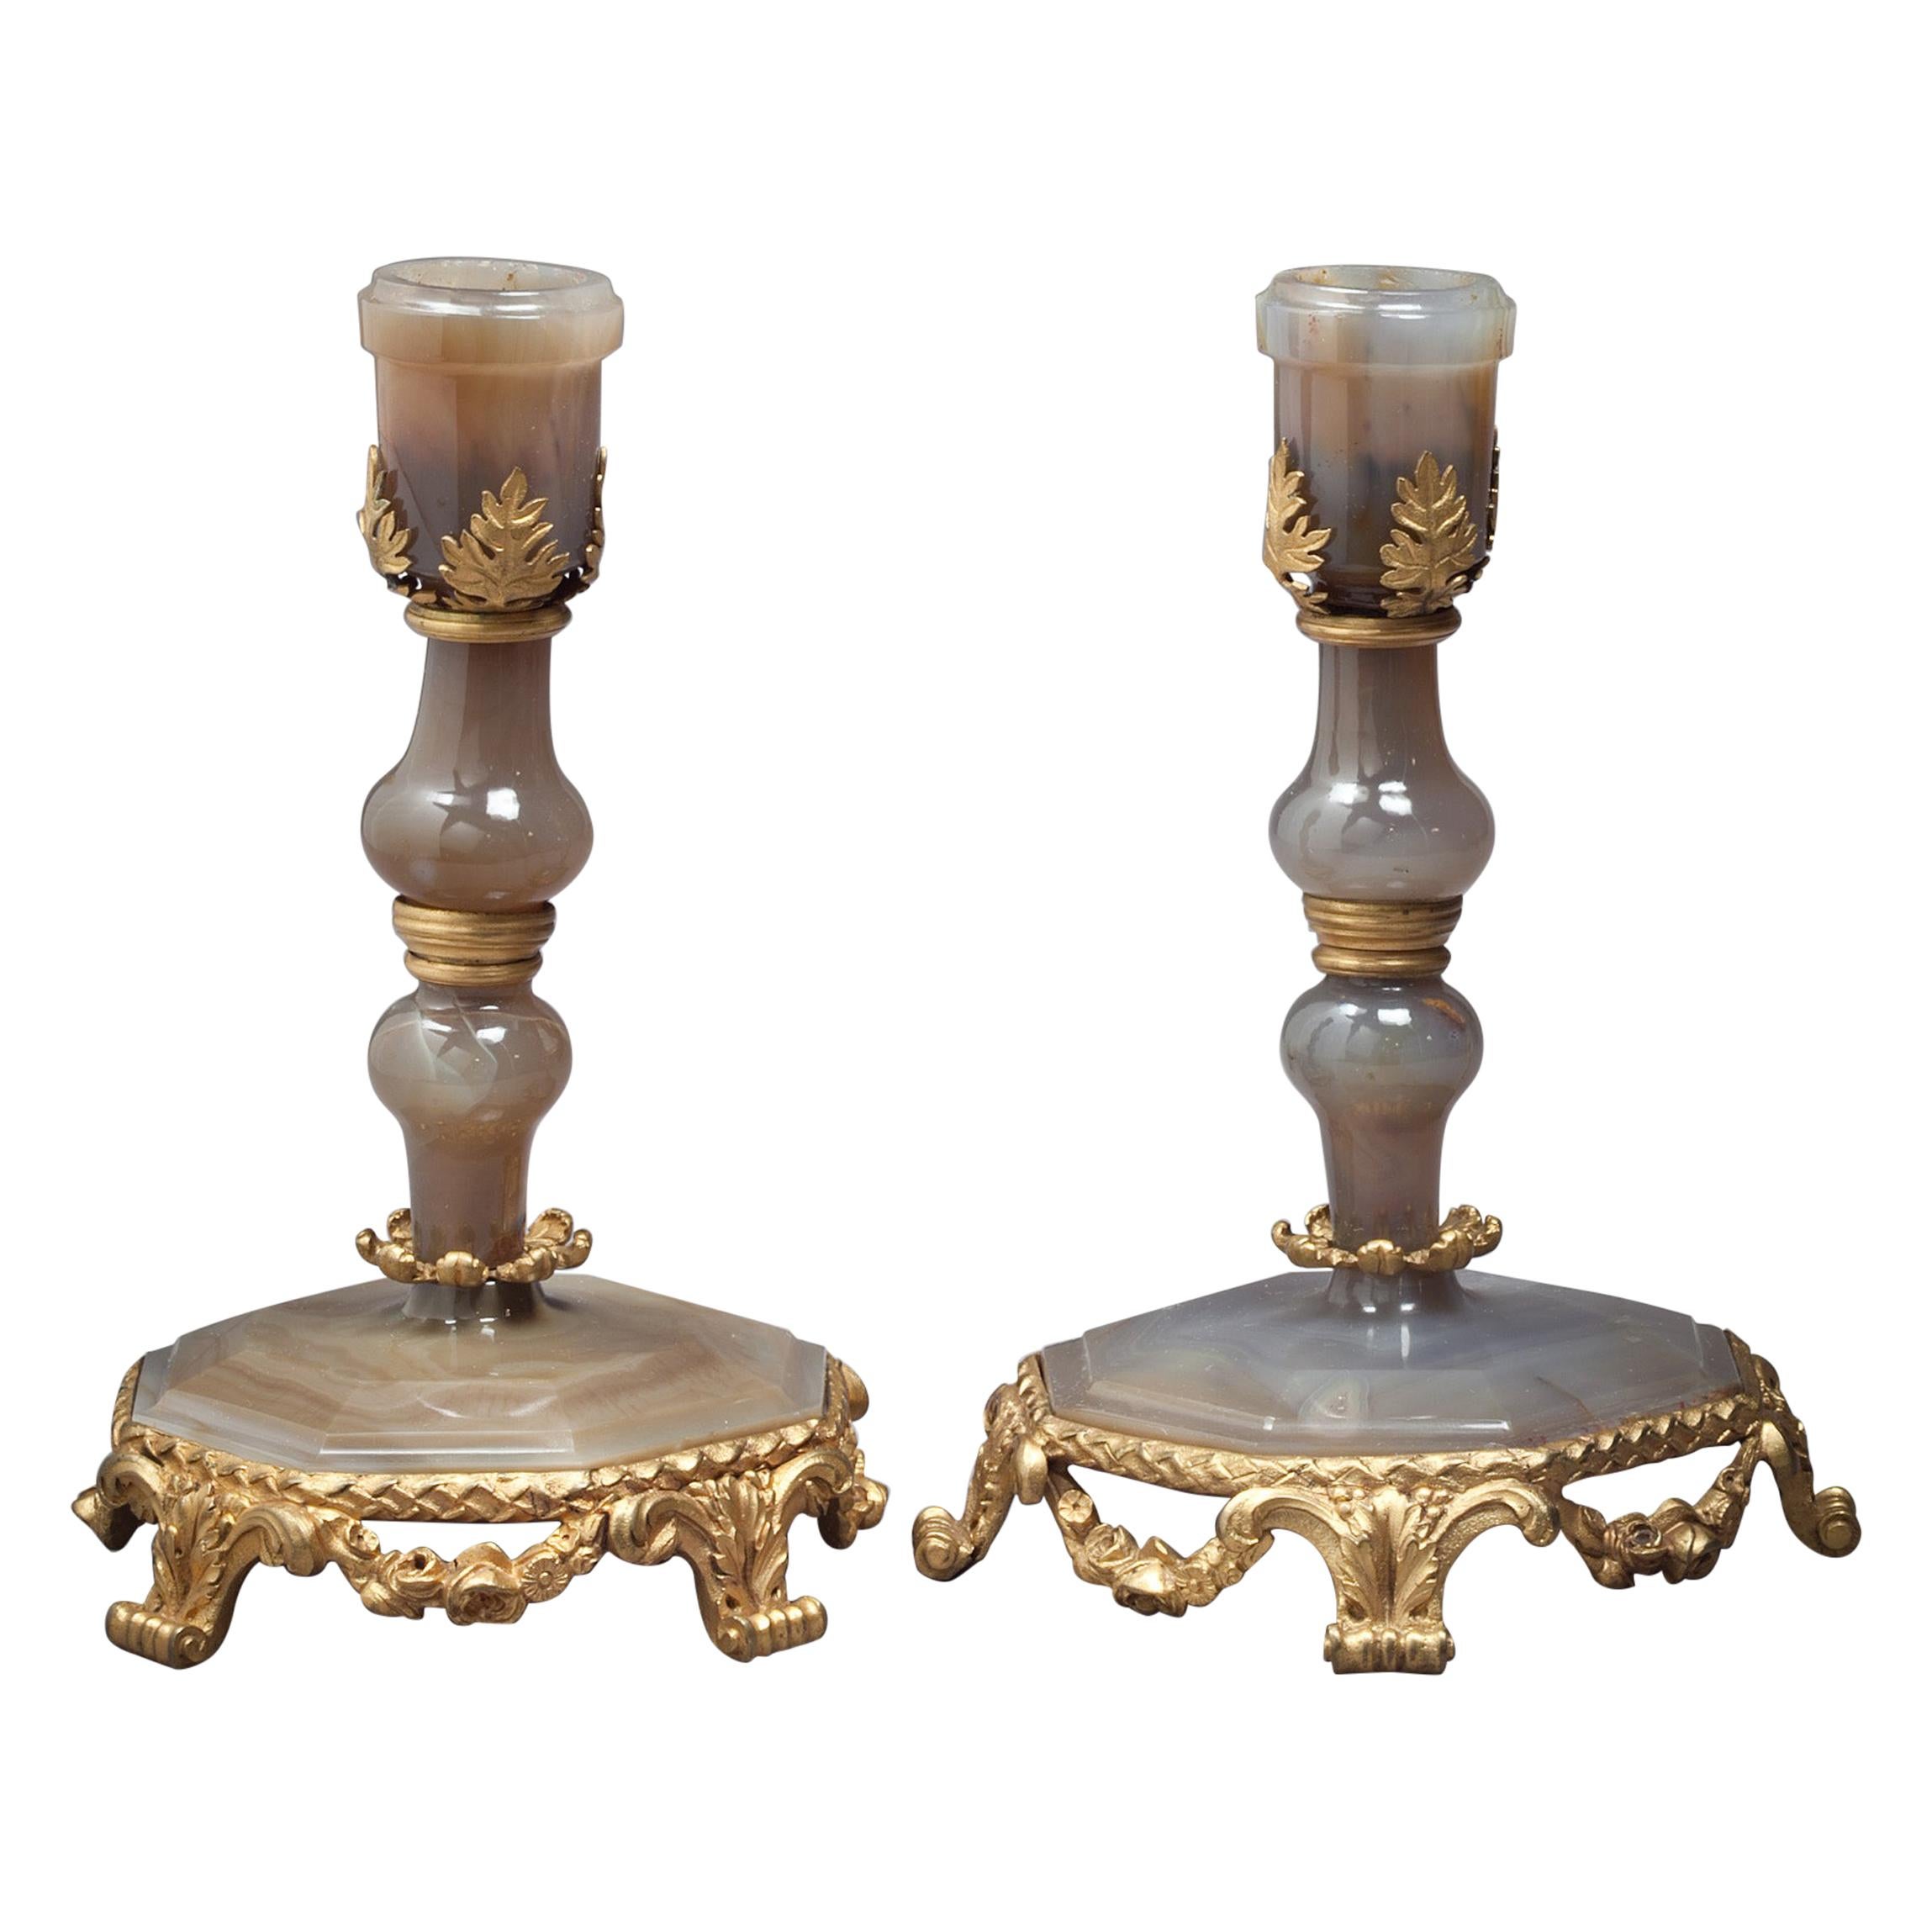 Pair of French Bronze and Agate Candlesticks, circa 1820